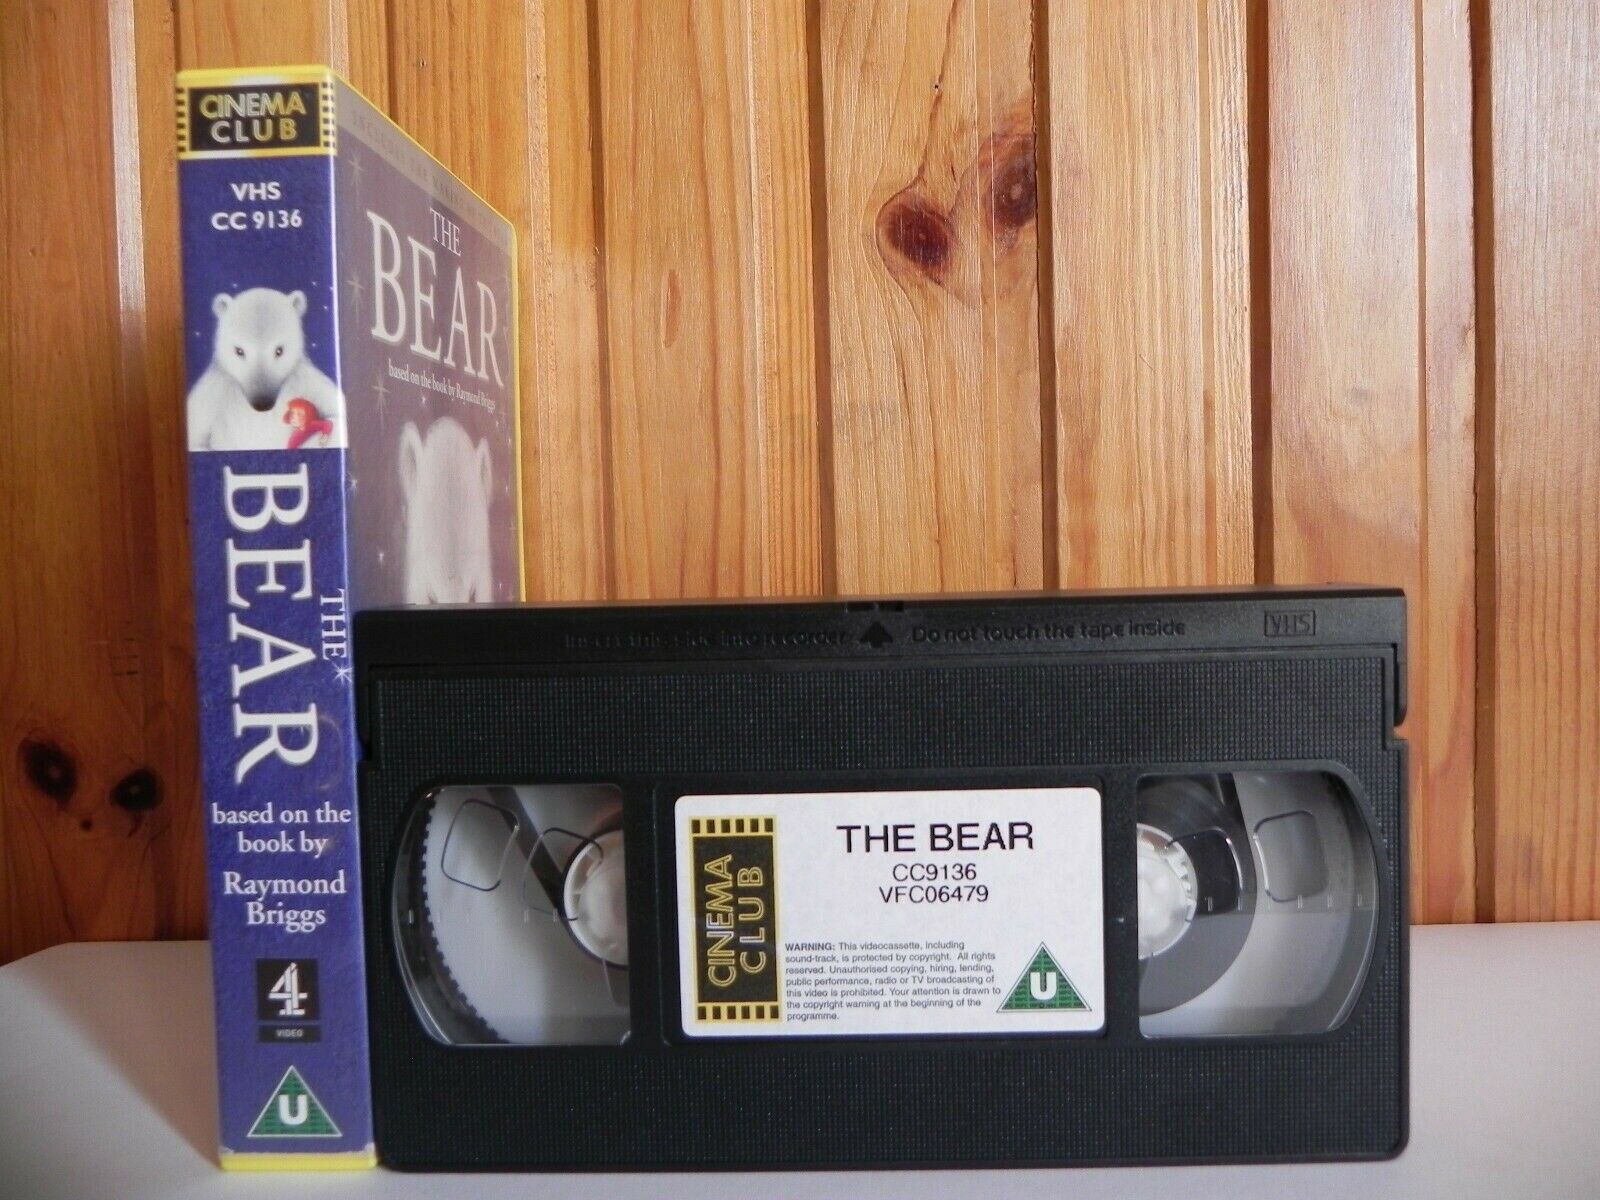 The Bear - Magical Animated Tale - Extraordinary Adventure - Children's - VHS-